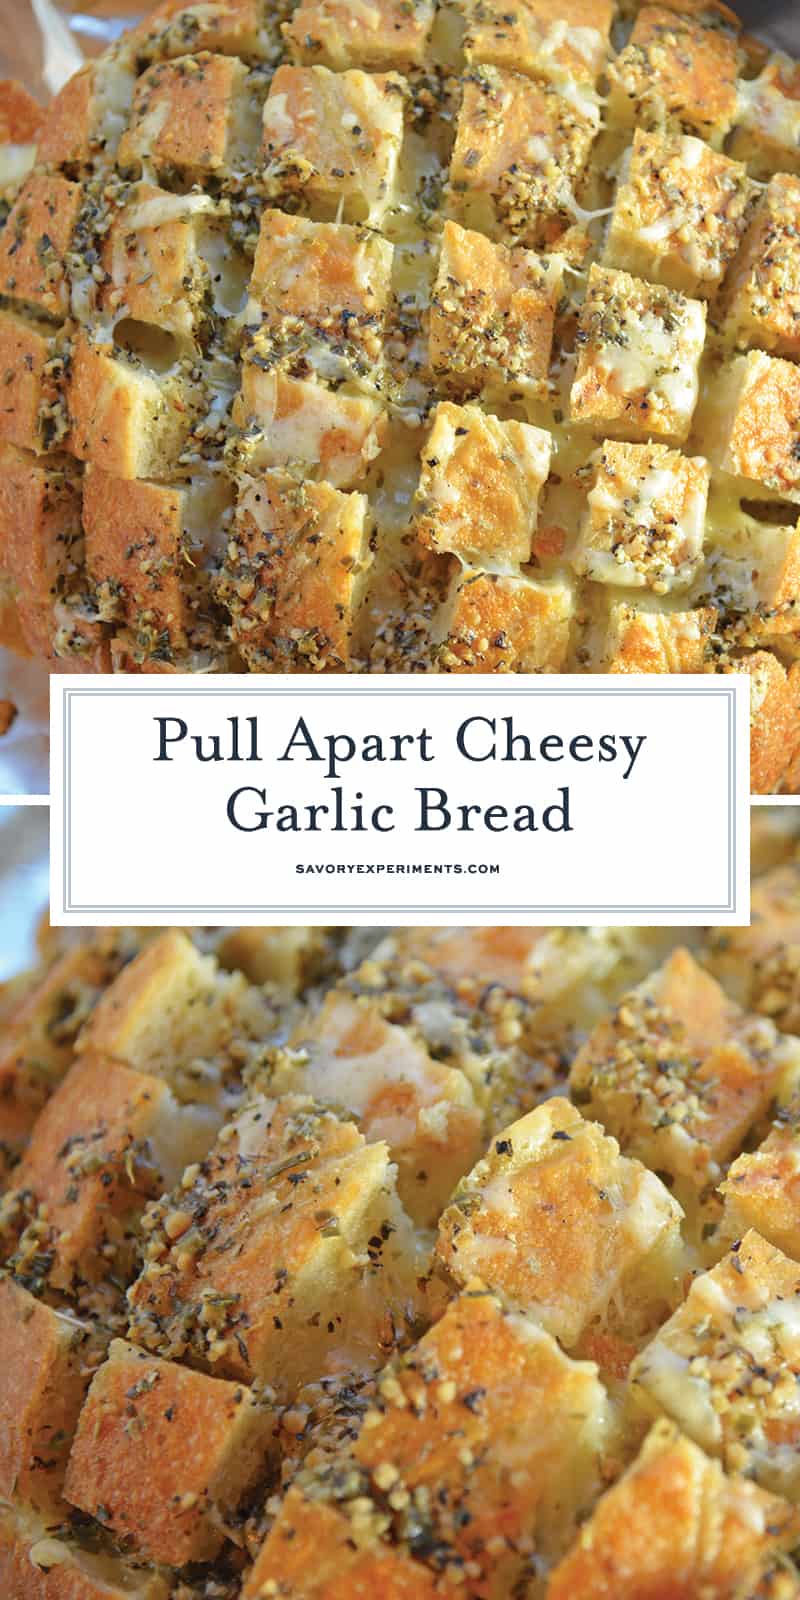 Pull Apart Cheesy Garlic Bread is a garlic bread recipe taken to new heights with cheese. It will be your new favorite go-to side. #pullapartcheesygarlicbread #garlicbread #pullapartbread www.savoryexperiments.com